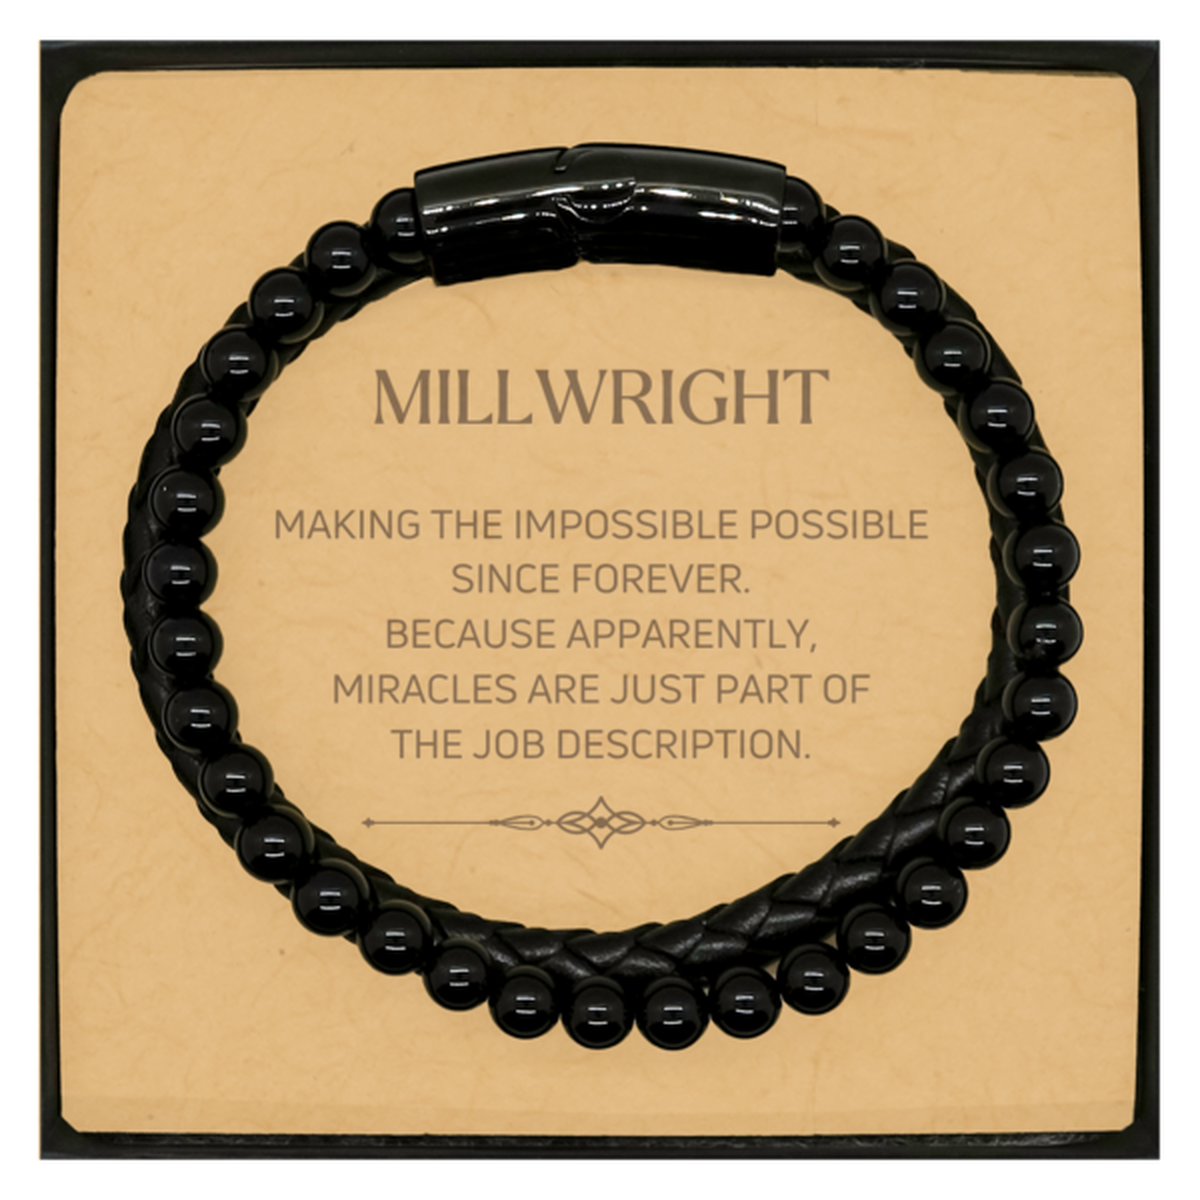 Funny Millwright Gifts, Miracles are just part of the job description, Inspirational Birthday Christmas Stone Leather Bracelets For Millwright, Men, Women, Coworkers, Friends, Boss